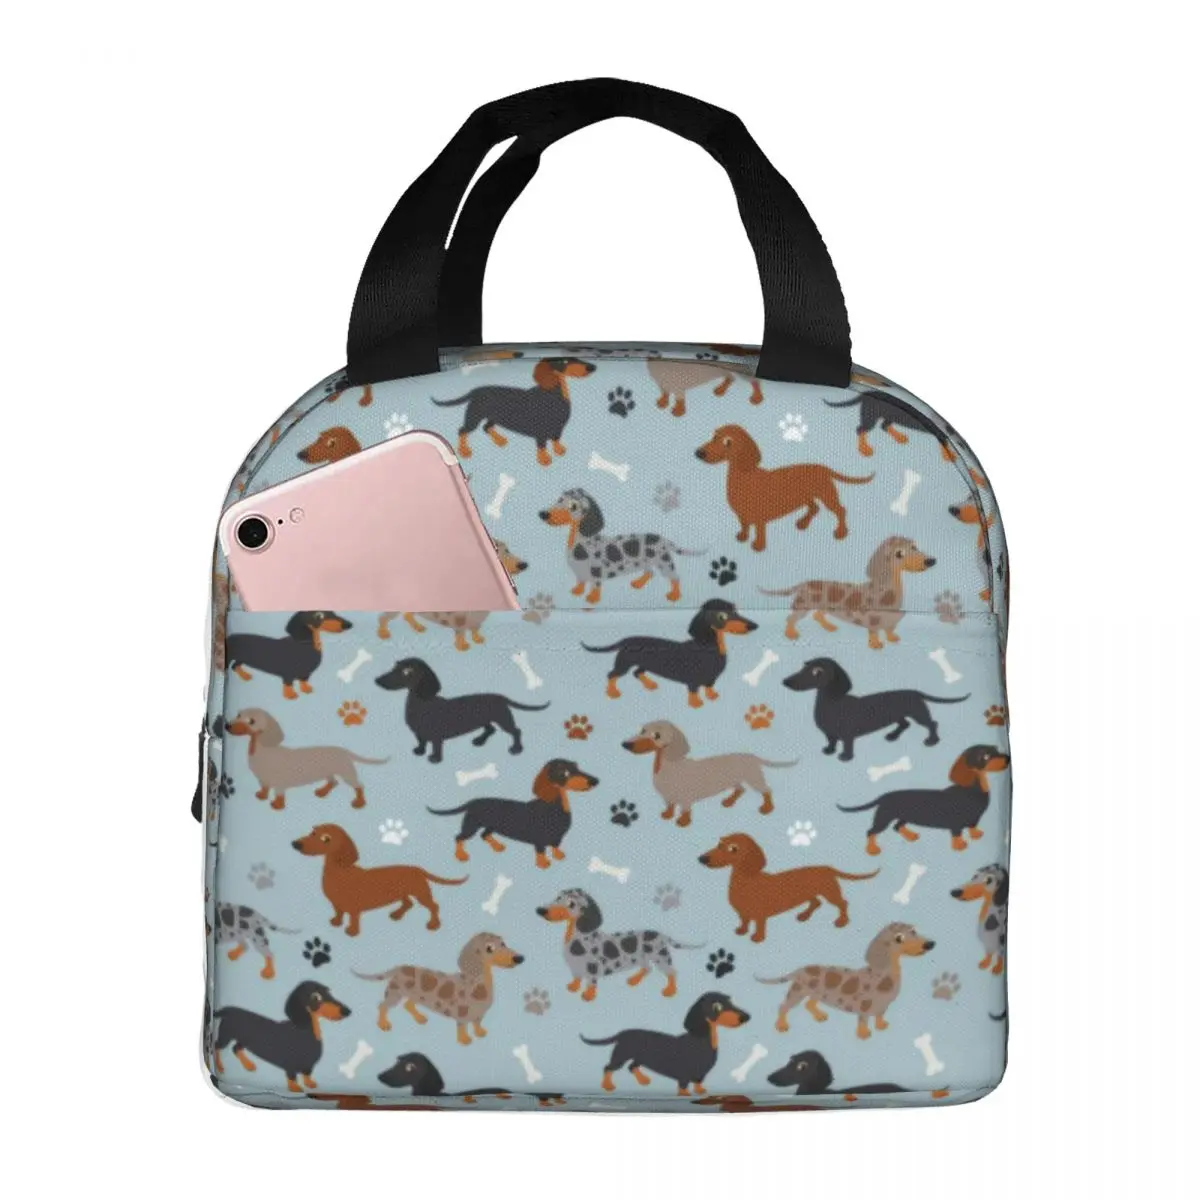 

Dog Print Lunch Bag with Handle Dachshund Paws and Bones Reusable Cooler Bag Cooling Office Meal Thermal Bag